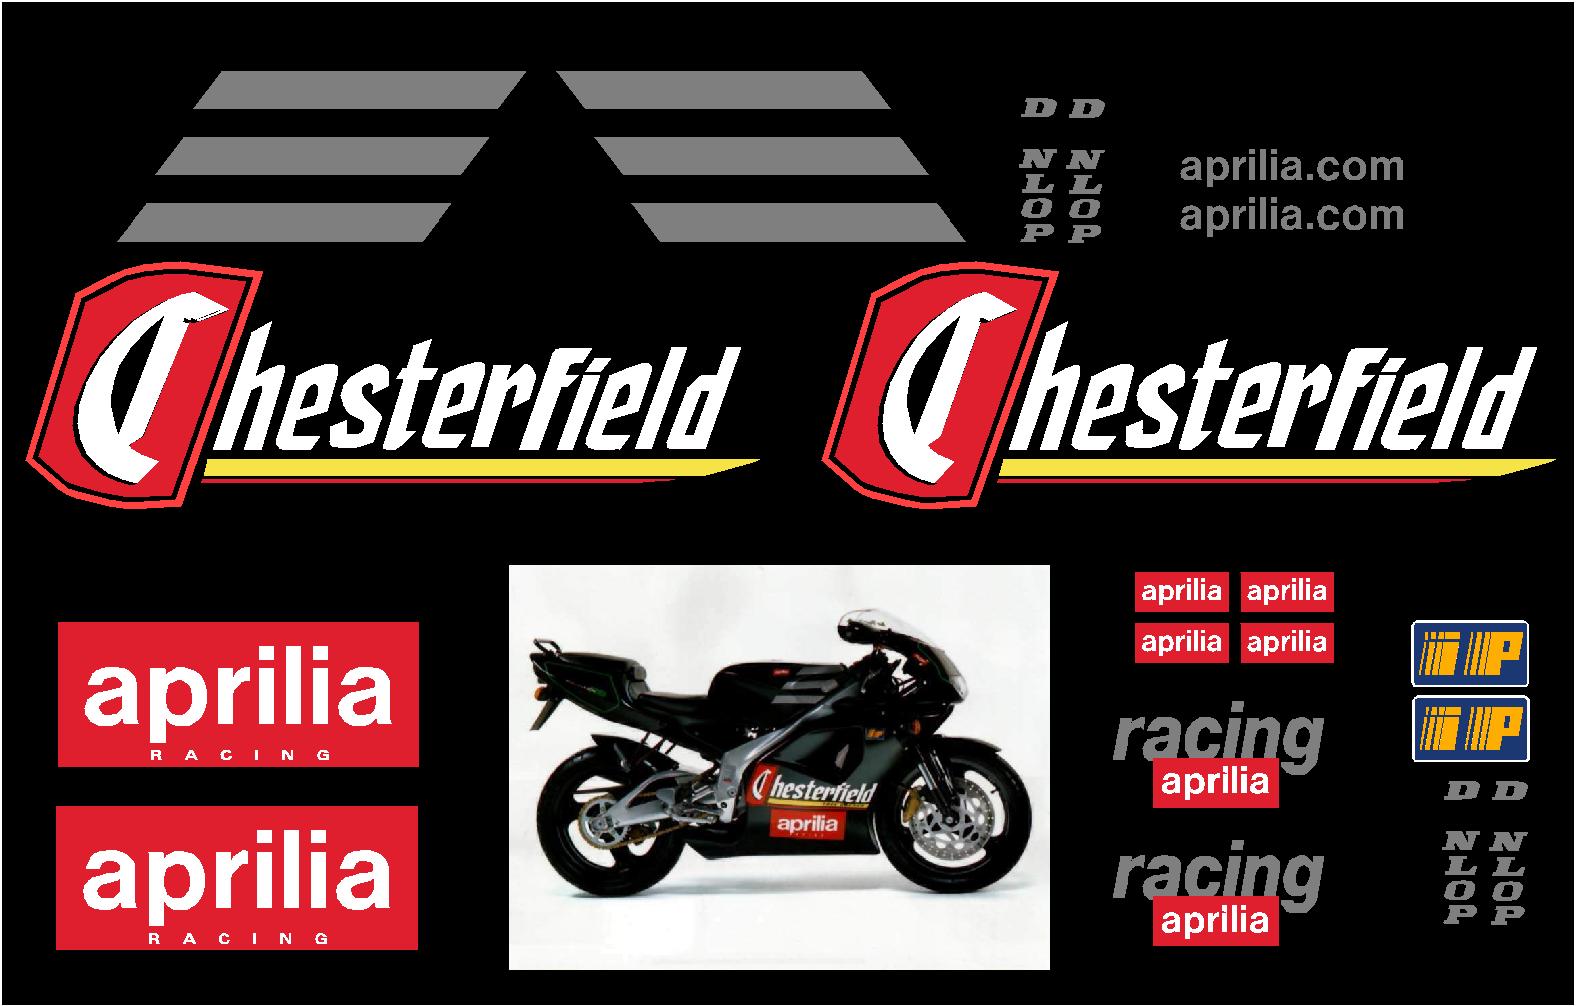 aprilia Motorcycle ip F1 Racing Laminated Decals Sticker Chesterfield Fuera  Set